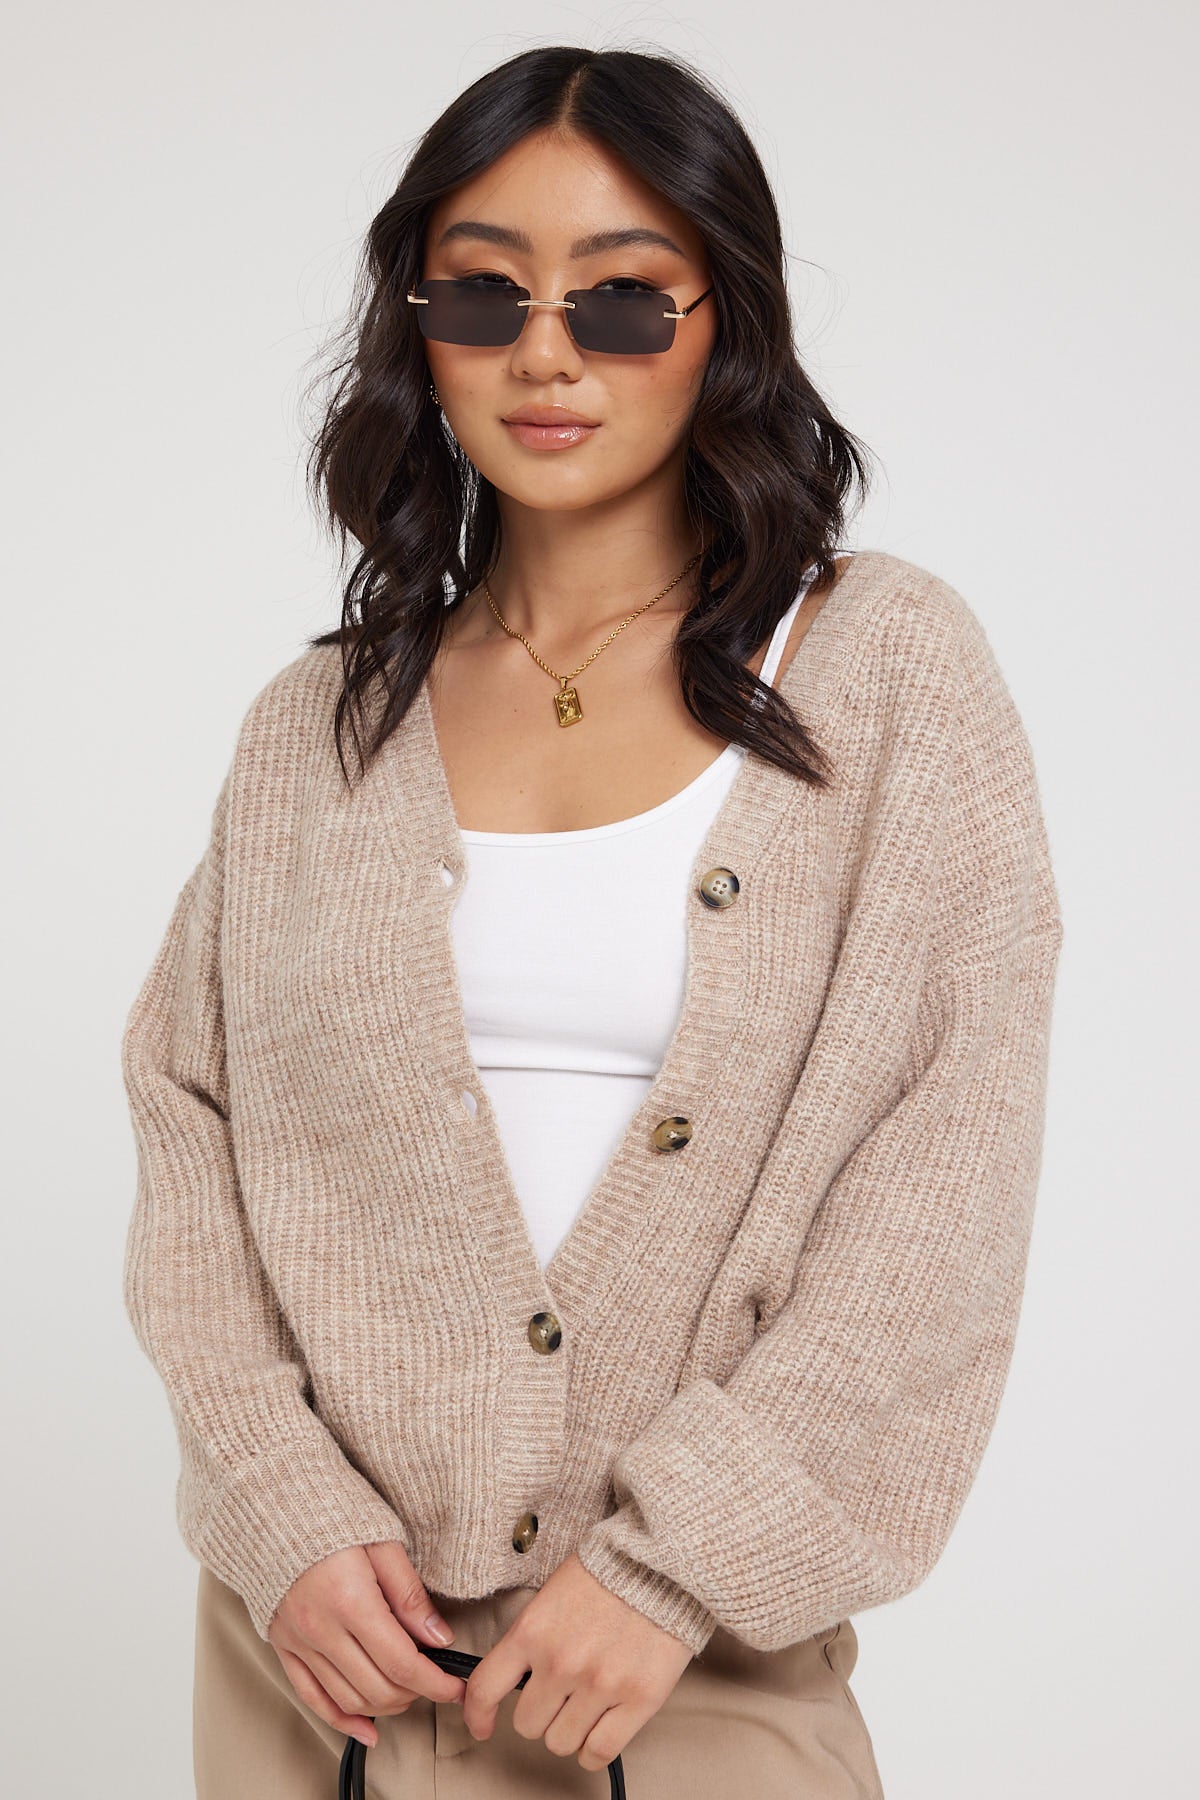 All About Eve Belle Knit Cardigan Oatmeal